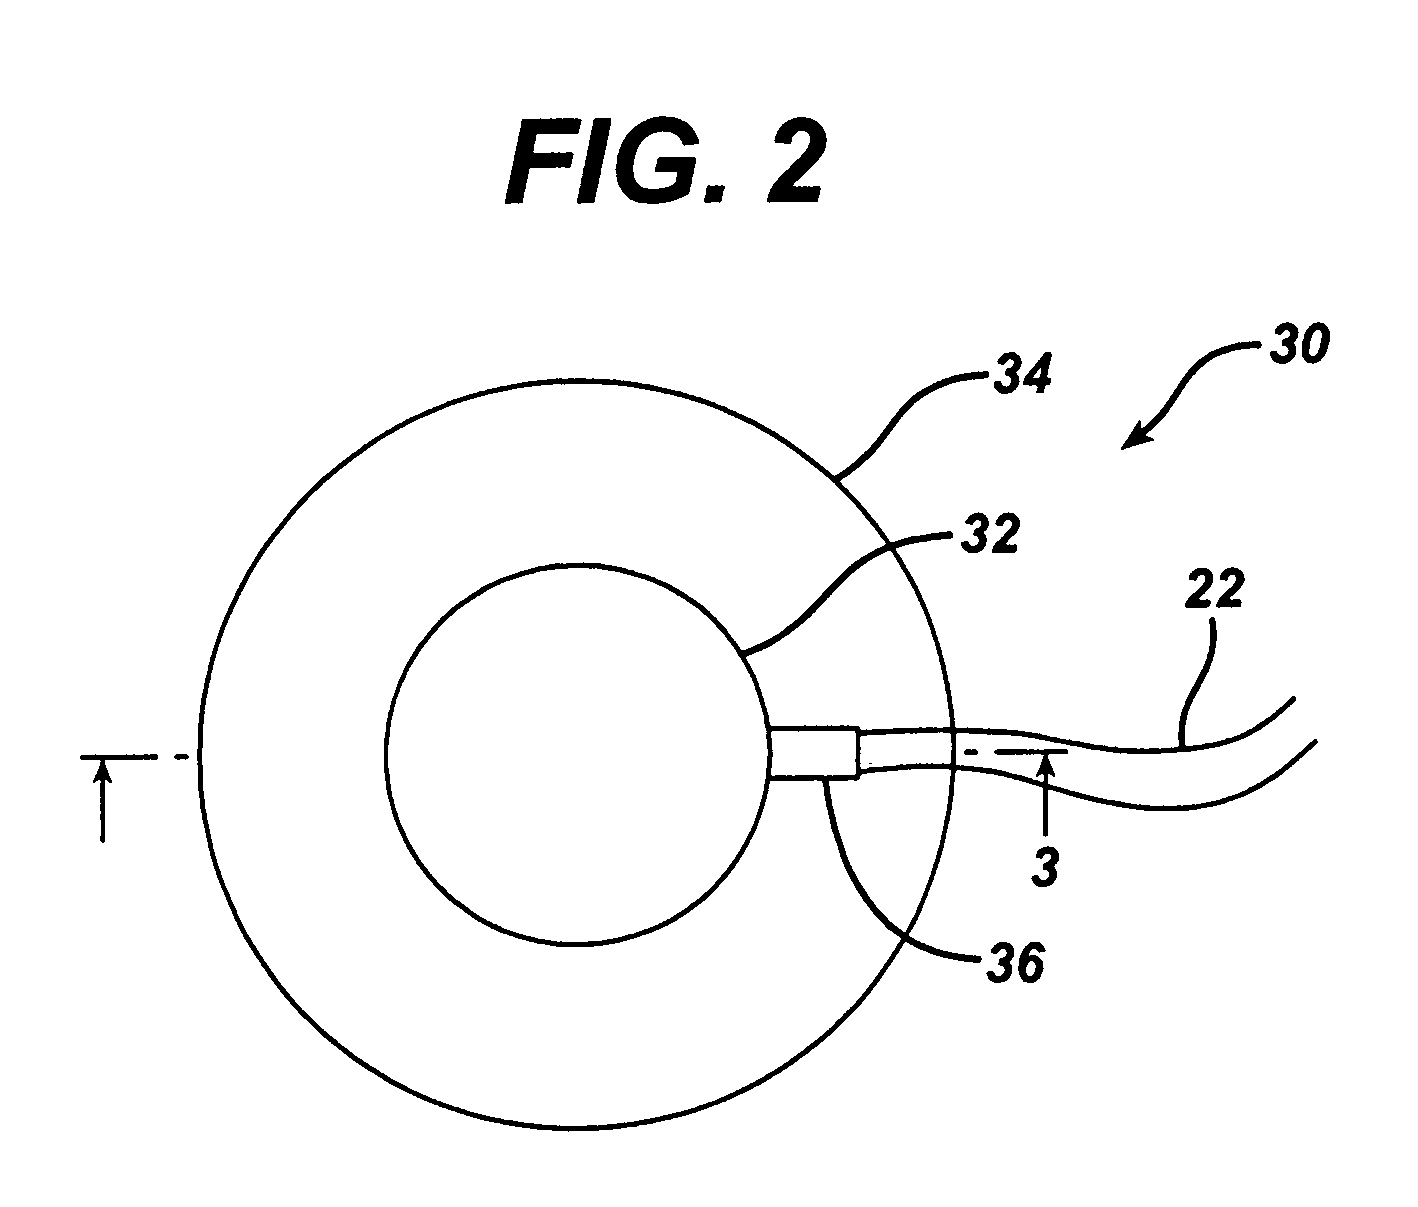 Metal bellows position feedback for hydraulic control of an adjustable gastric band